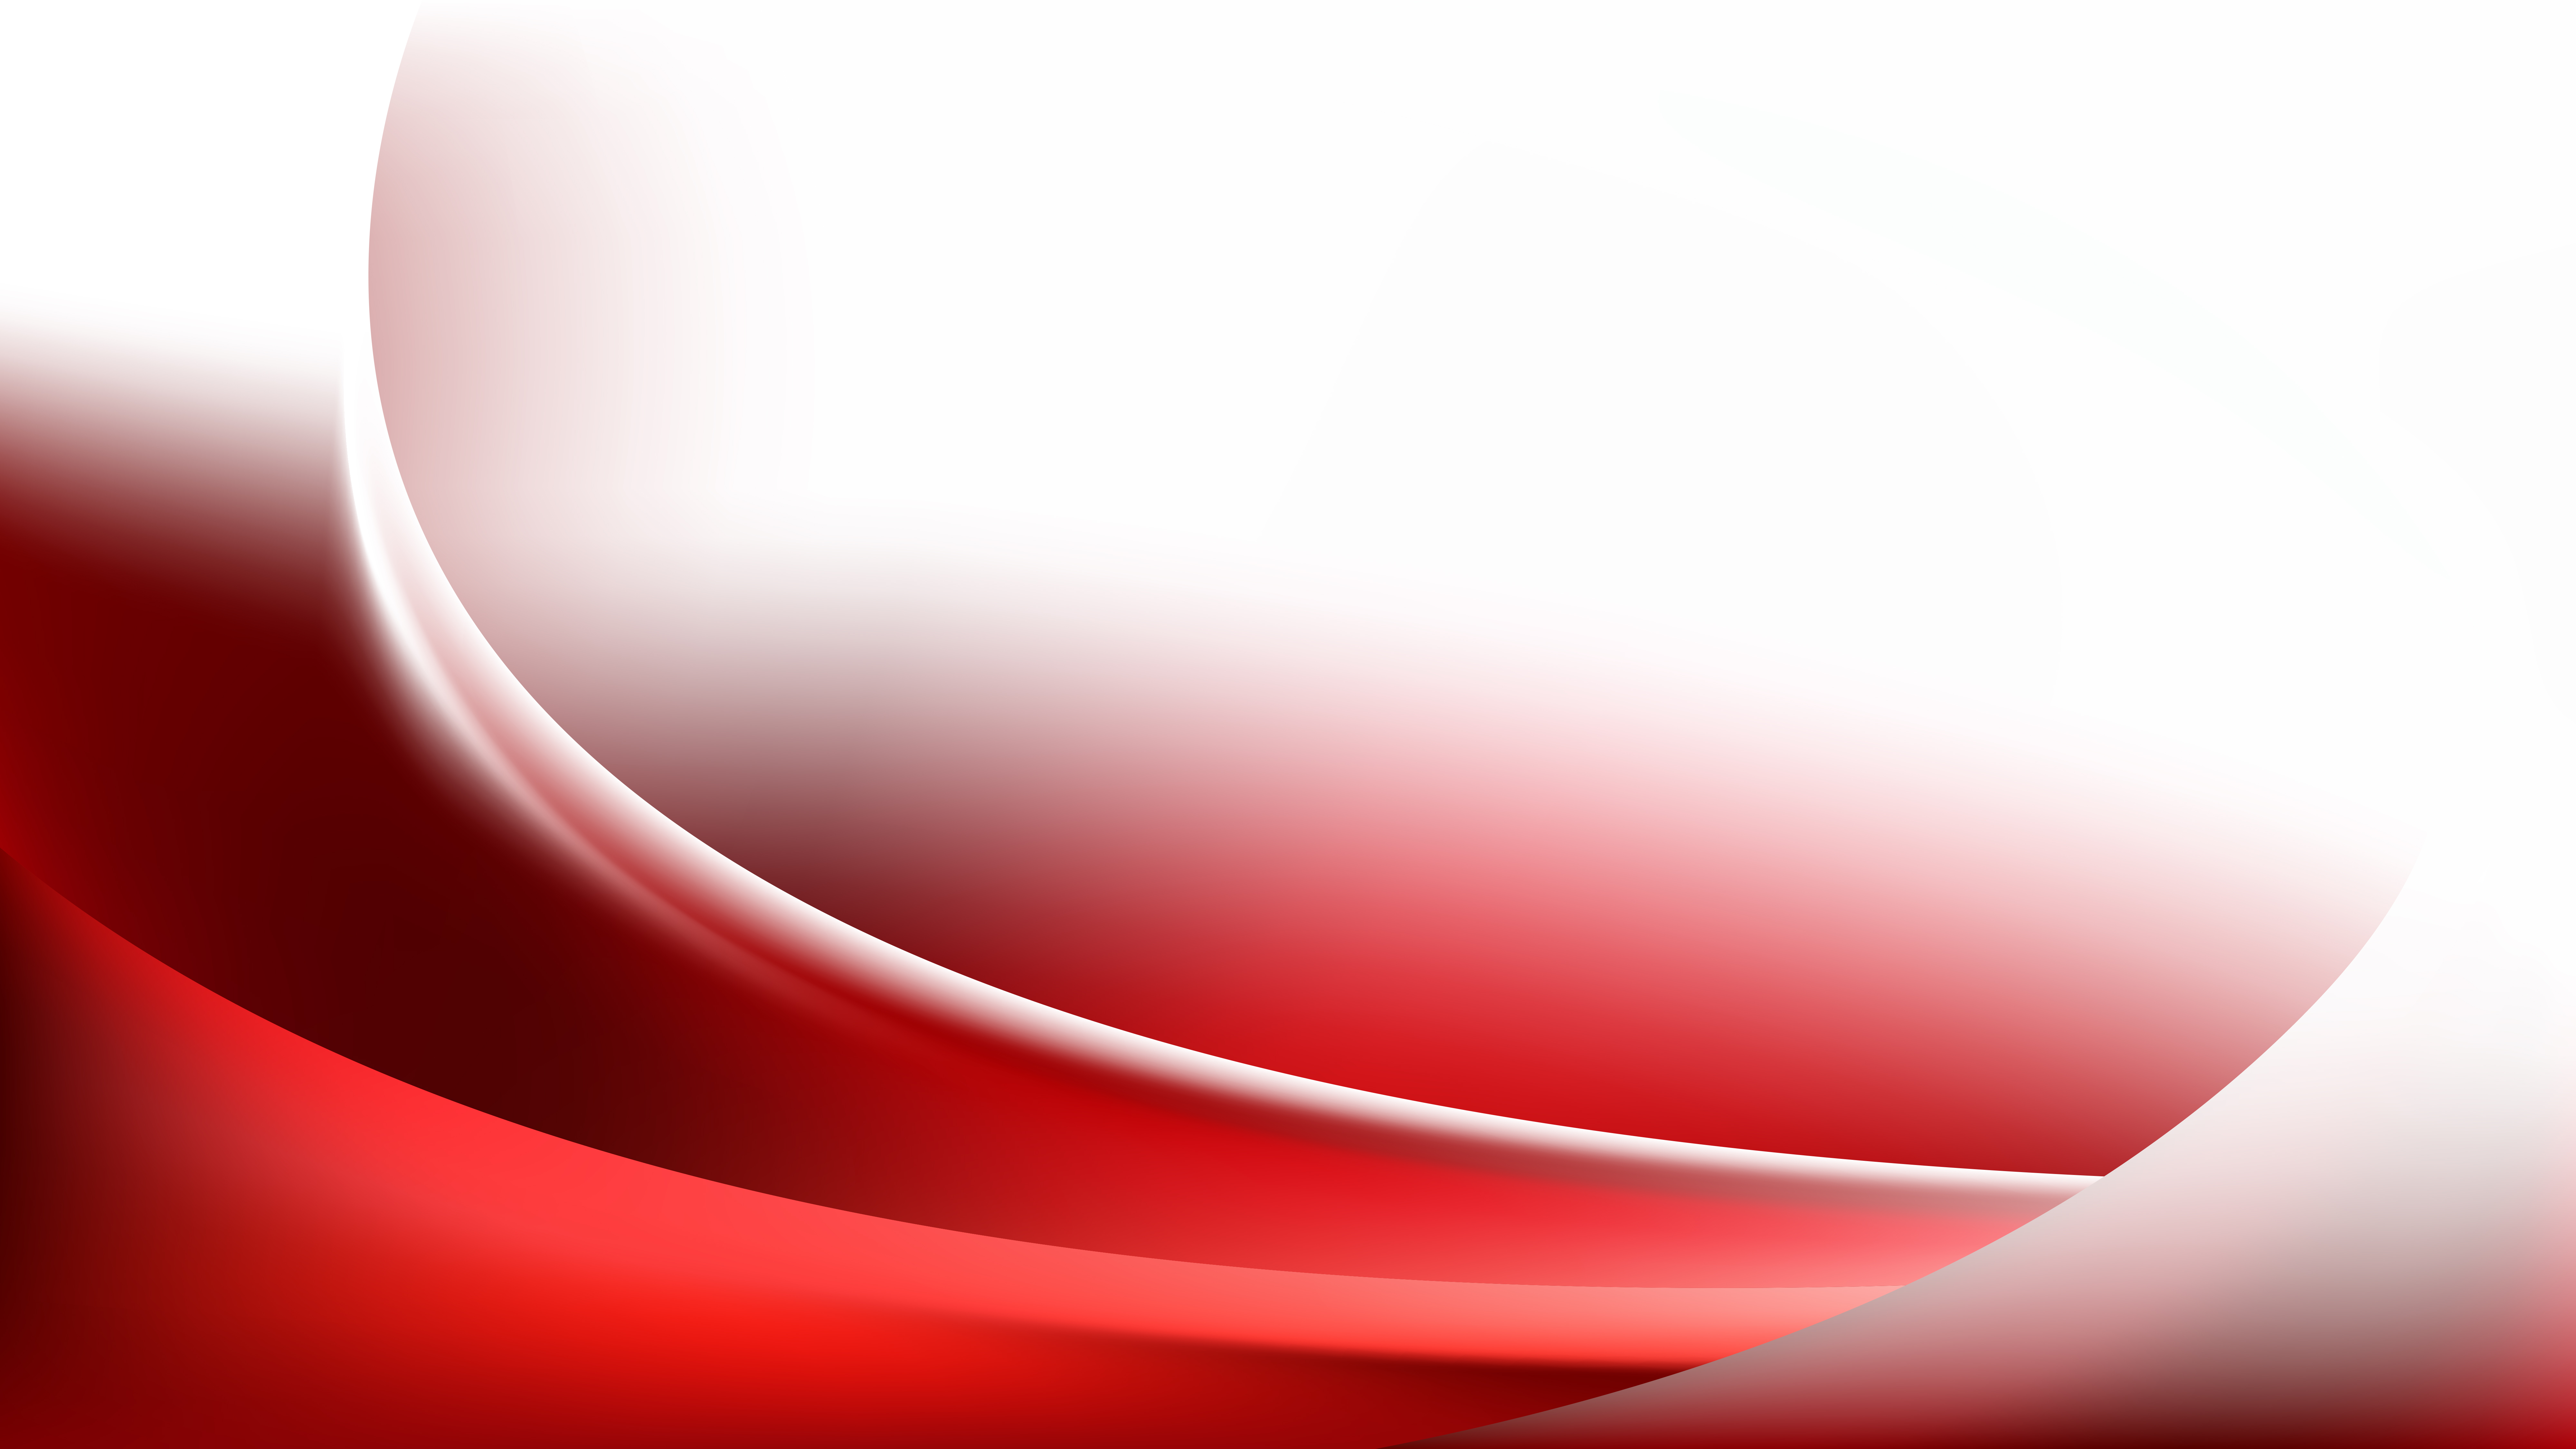 Free Abstract Red and White Curve Background Vector Illustration